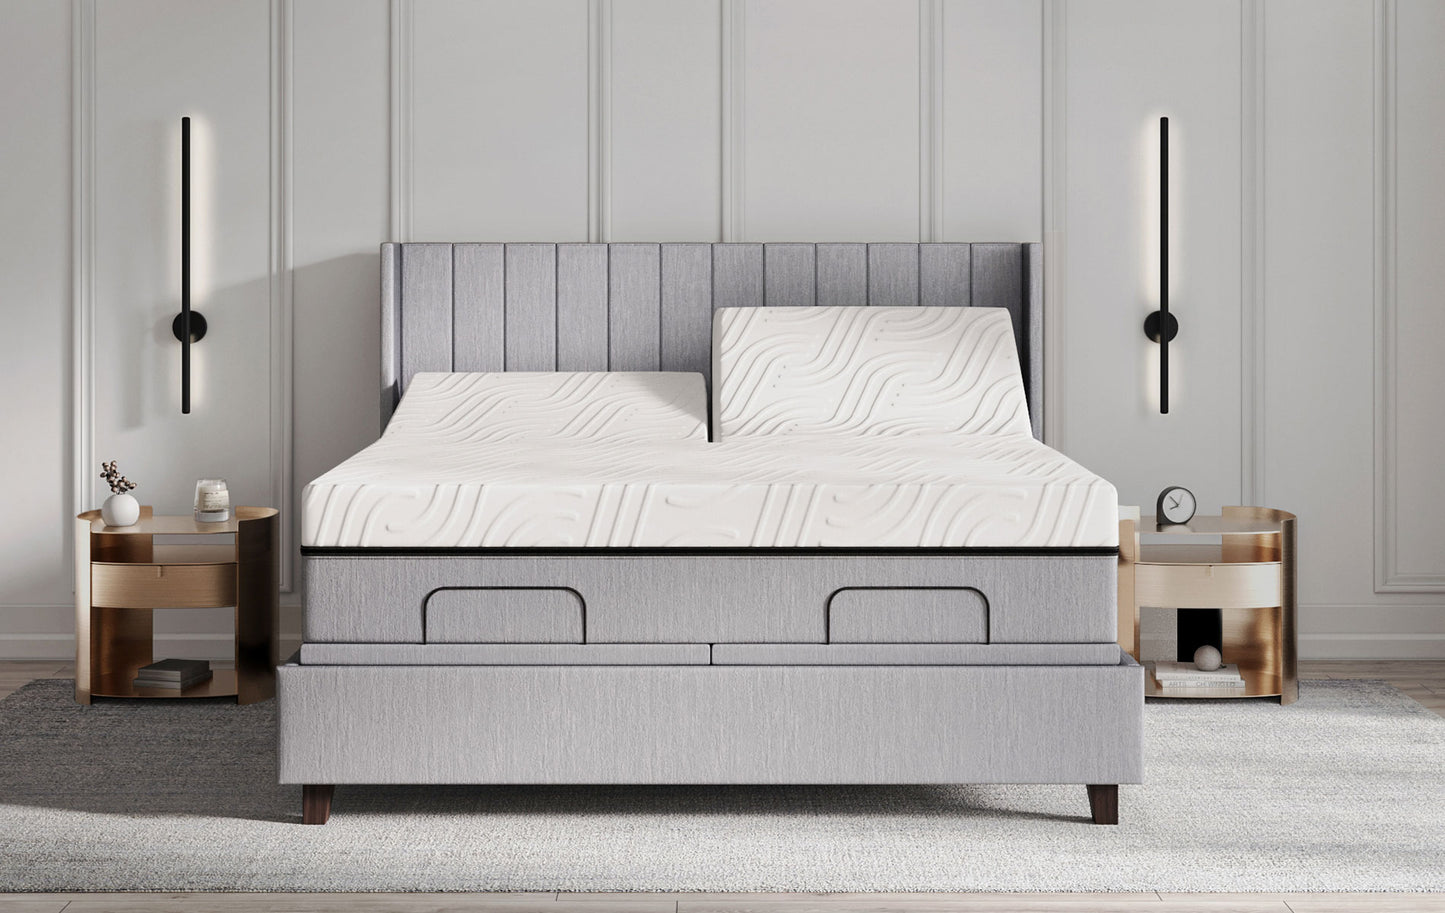 Personal Comfort R15 Smart Bed  Our Most Innovative & Luxurious Bed